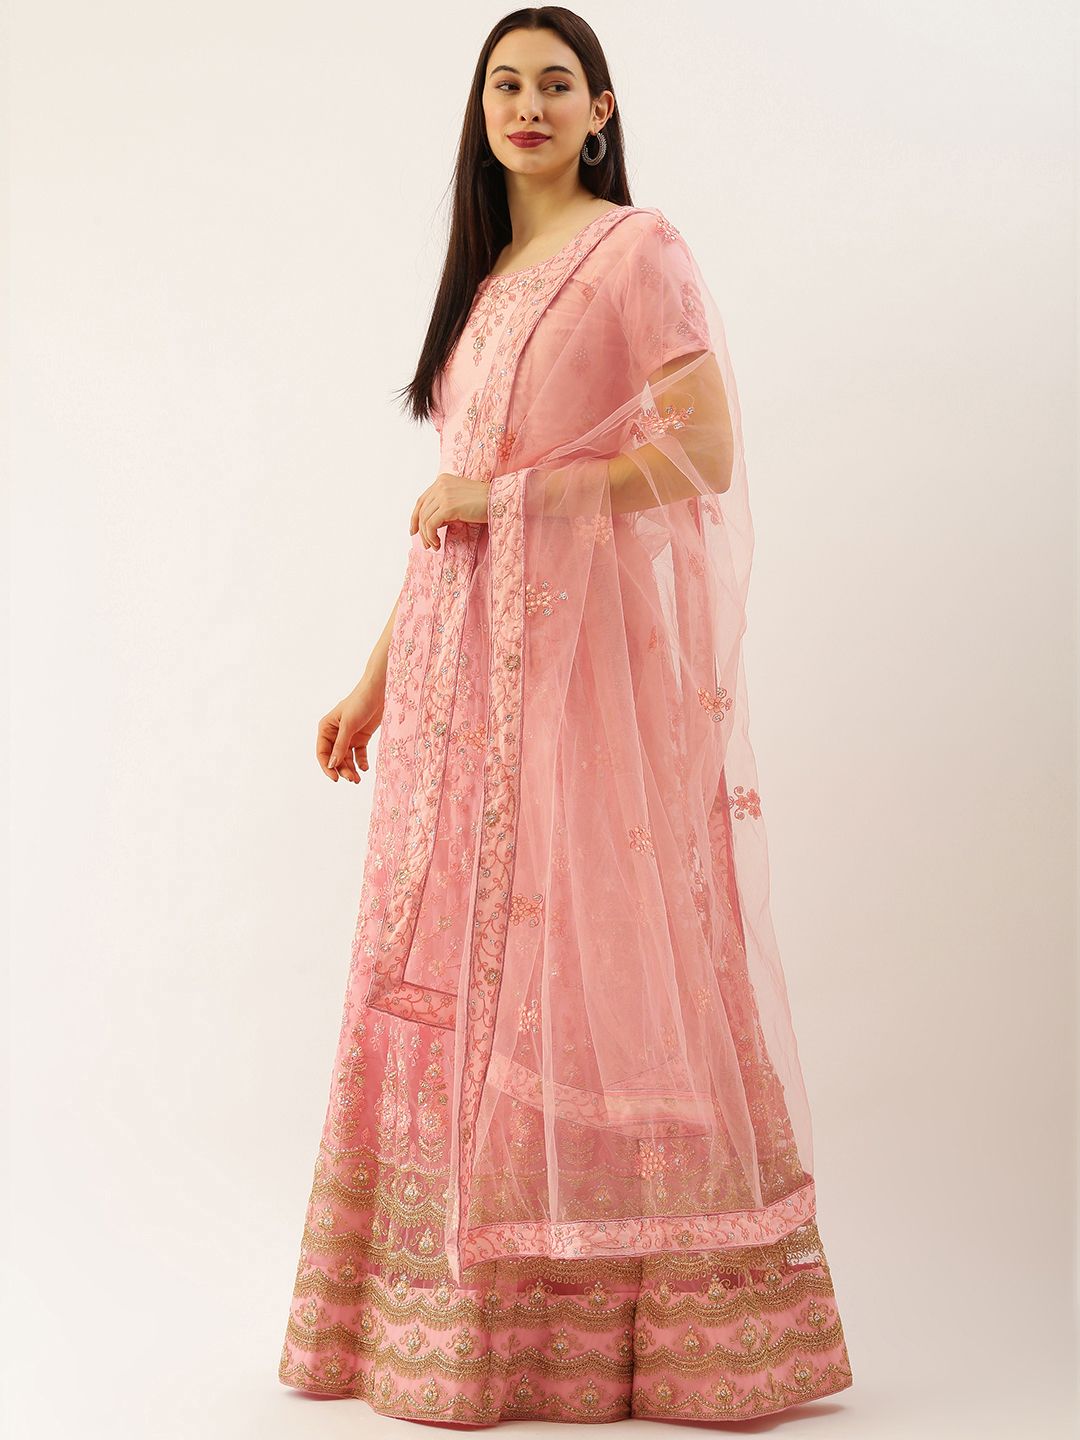 LADUSAA Pink Embroidered Semi-Stitched Lehenga & Unstitched Blouse With Dupatta Price in India